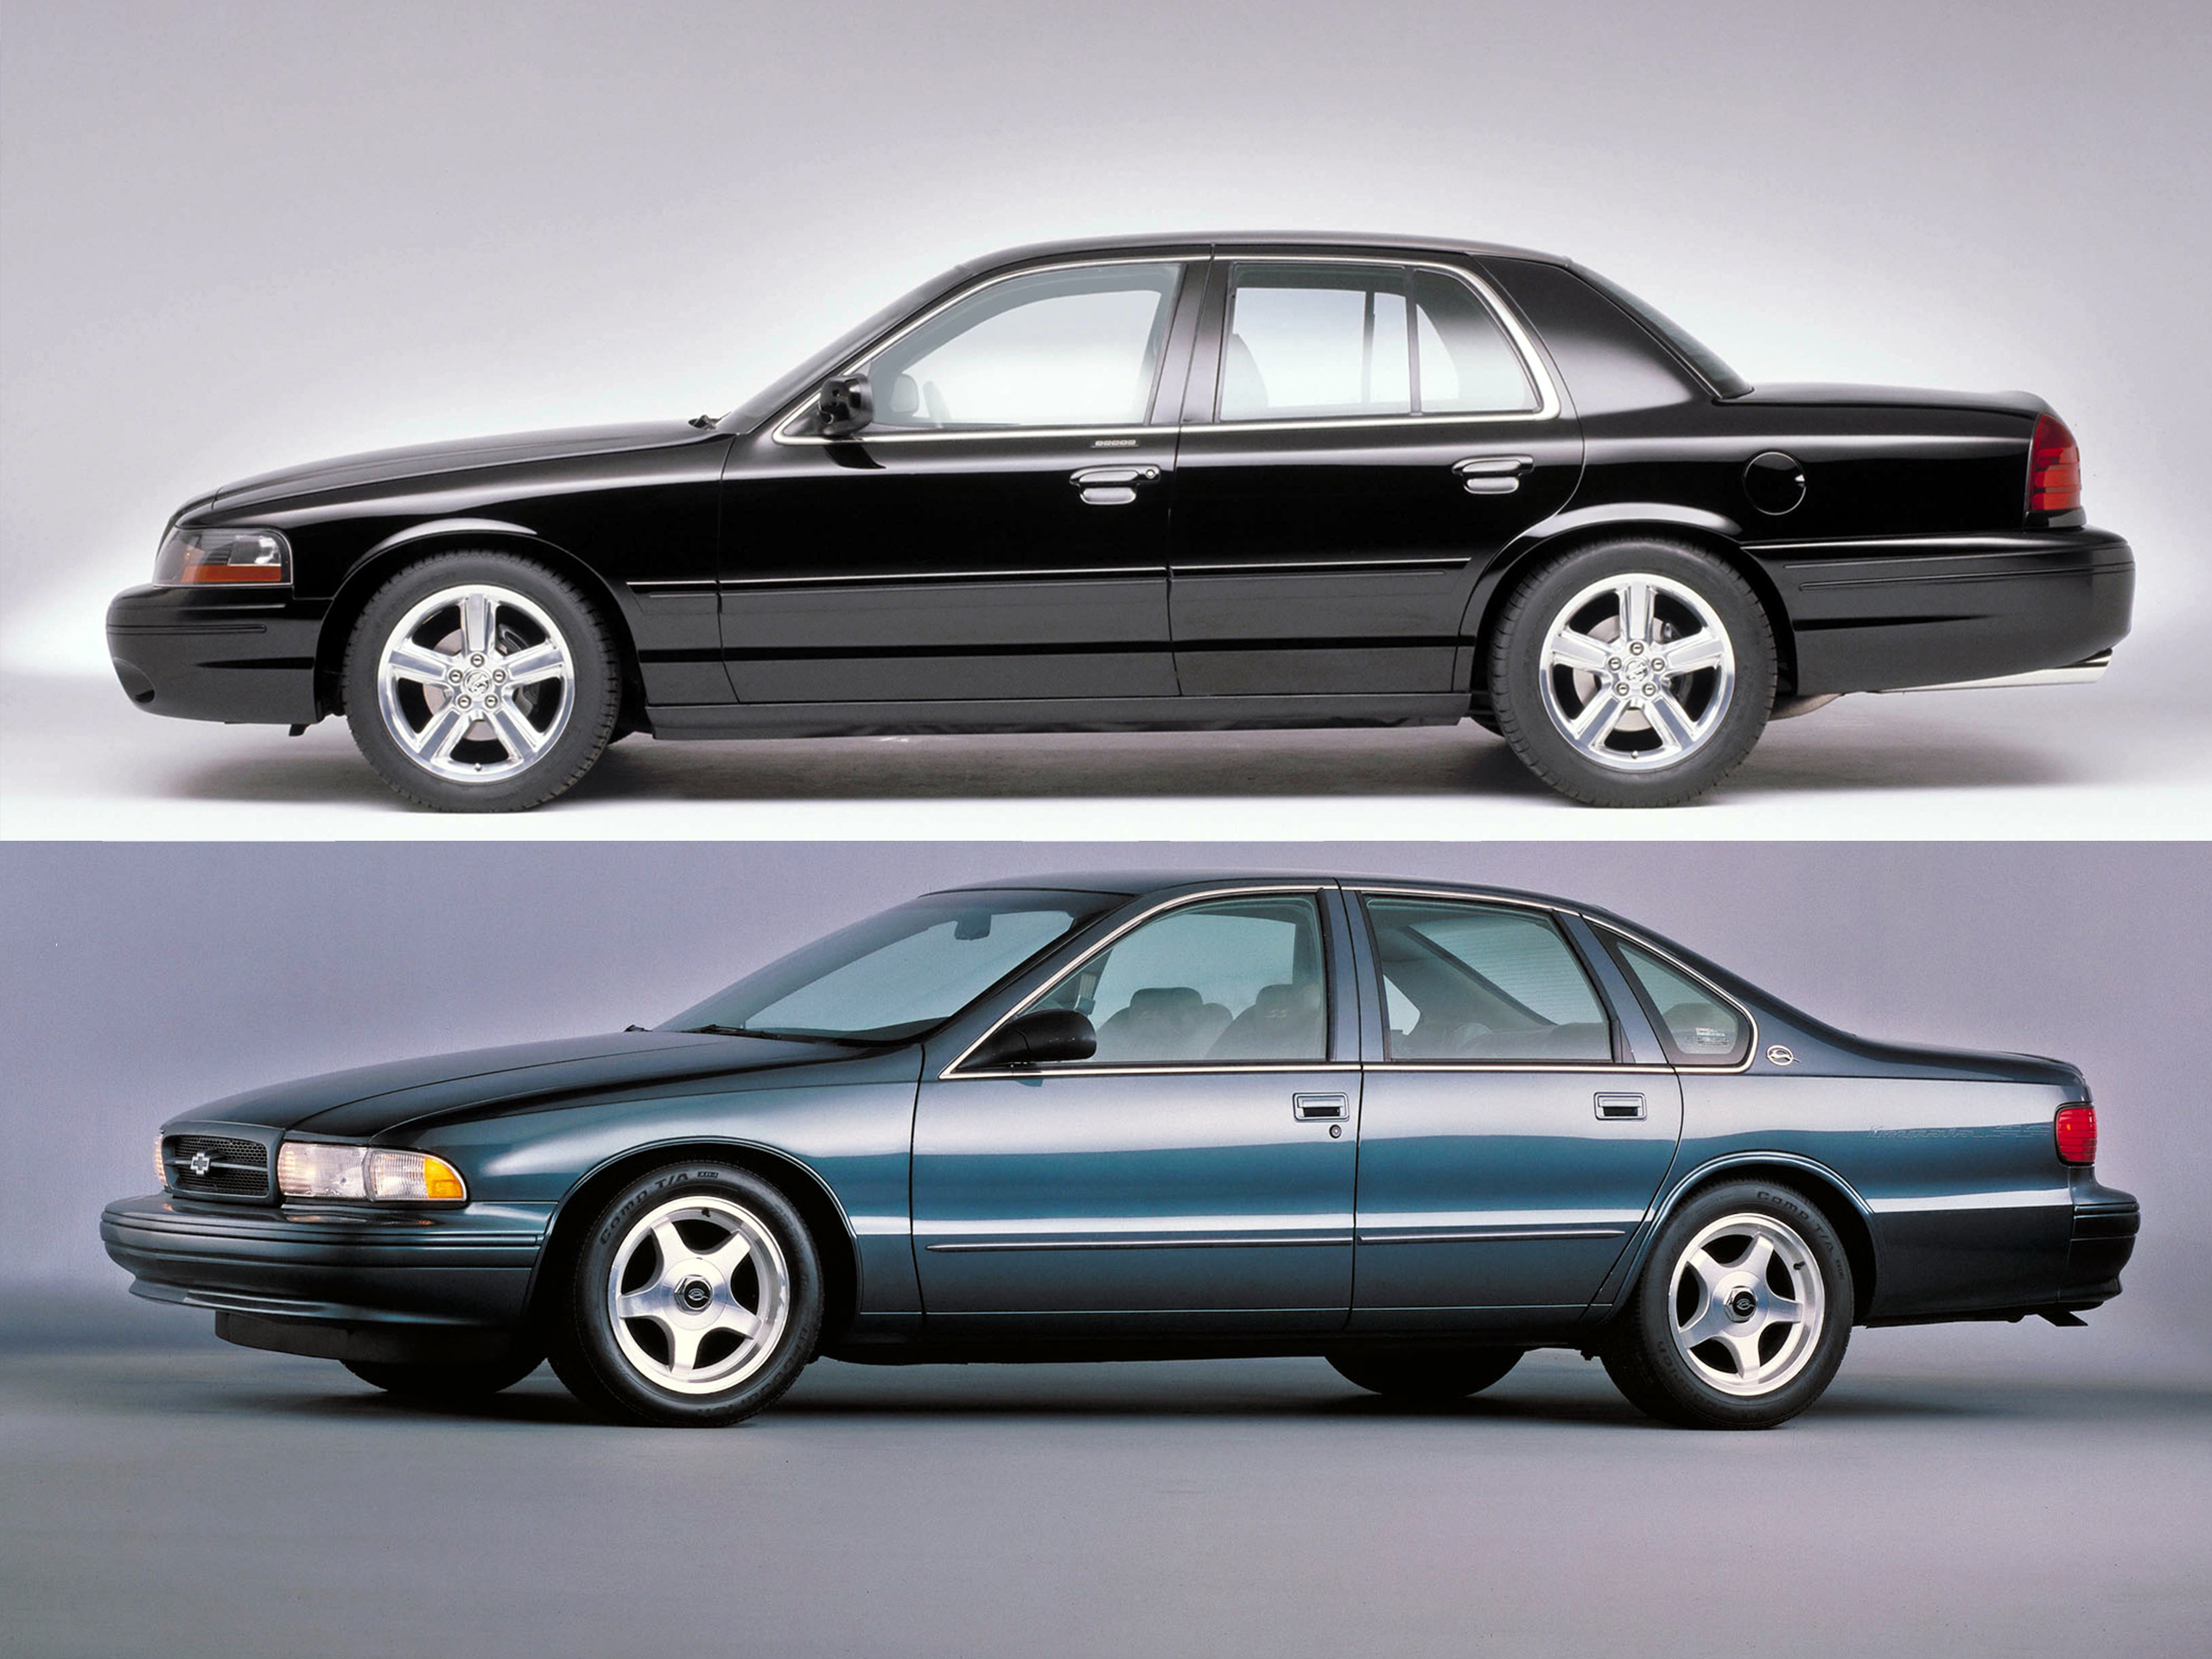 The Chevy Impala SS and Mercury Marauder are classic American